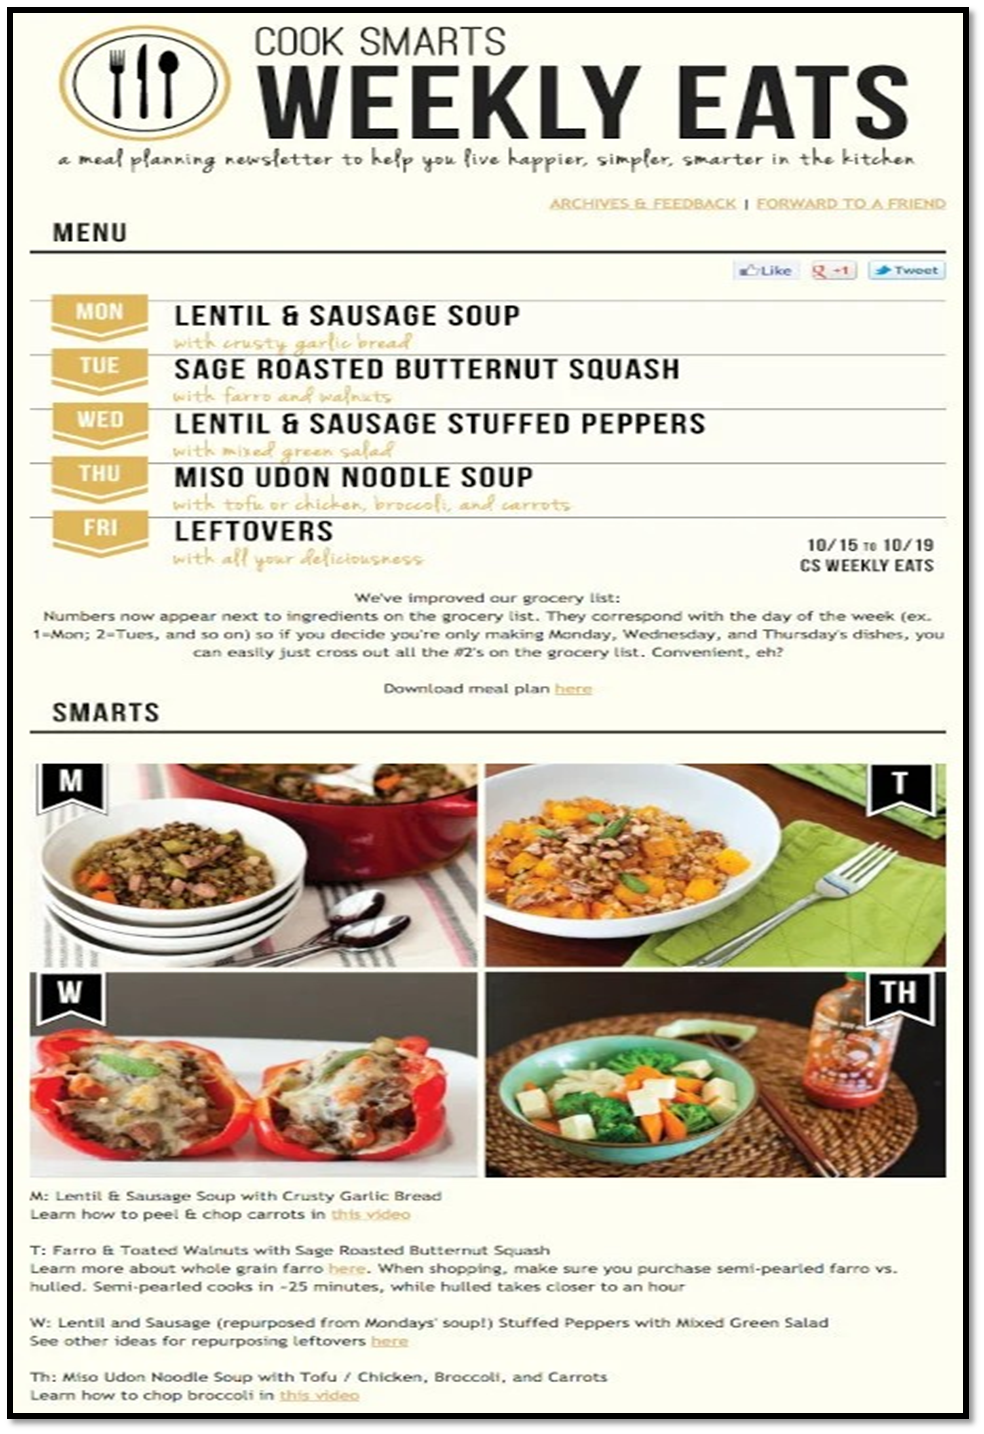 cook smarts email template for their weekly newsletter describe three sections first menu, second how-to's in the kitchen and third is tips